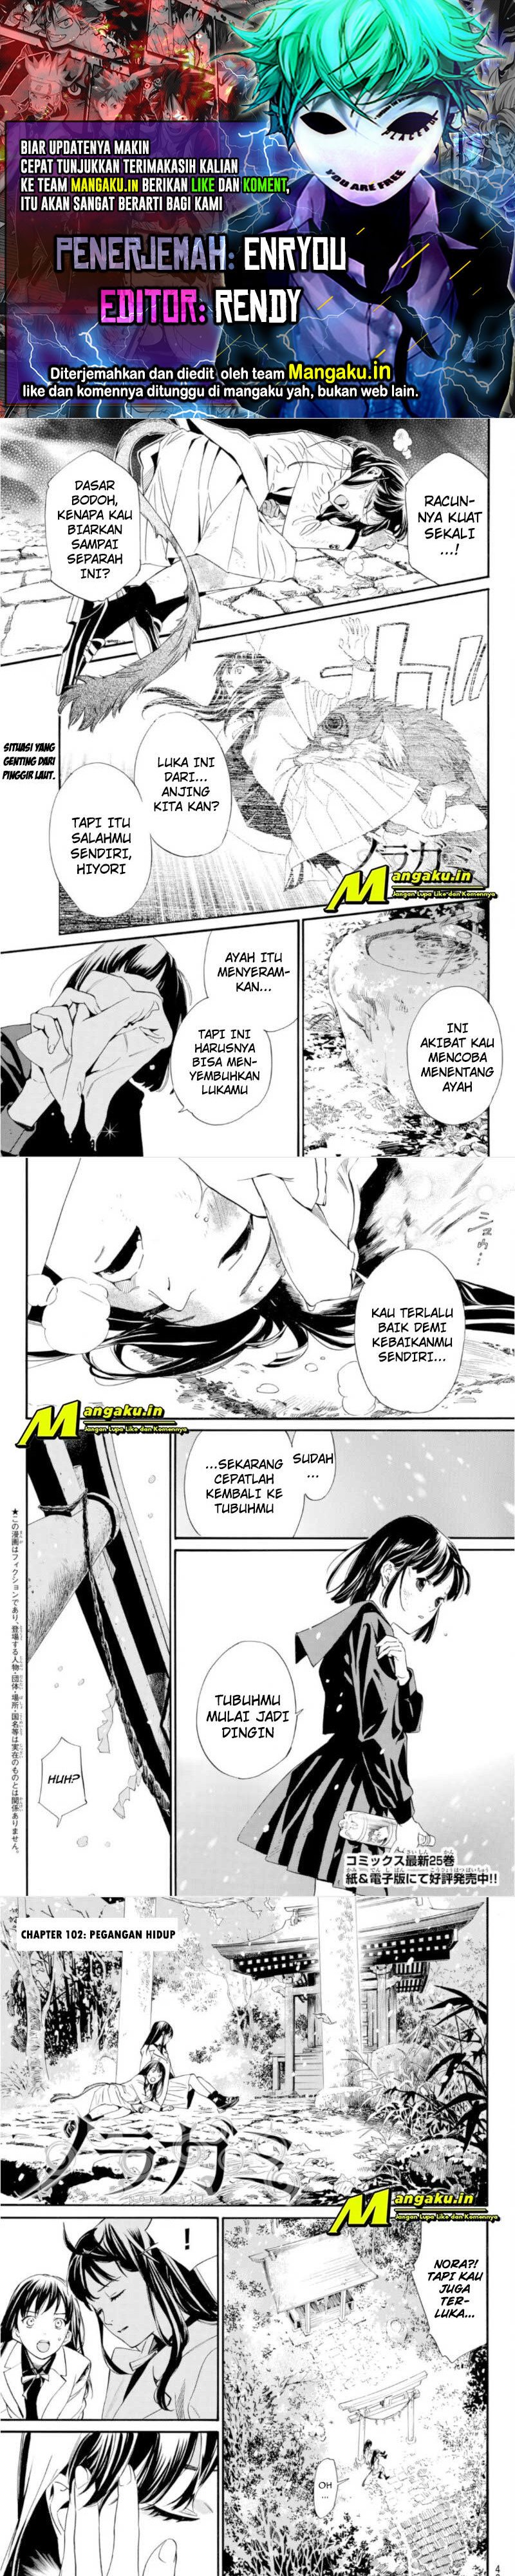 Noragami Chapter 102 - 43